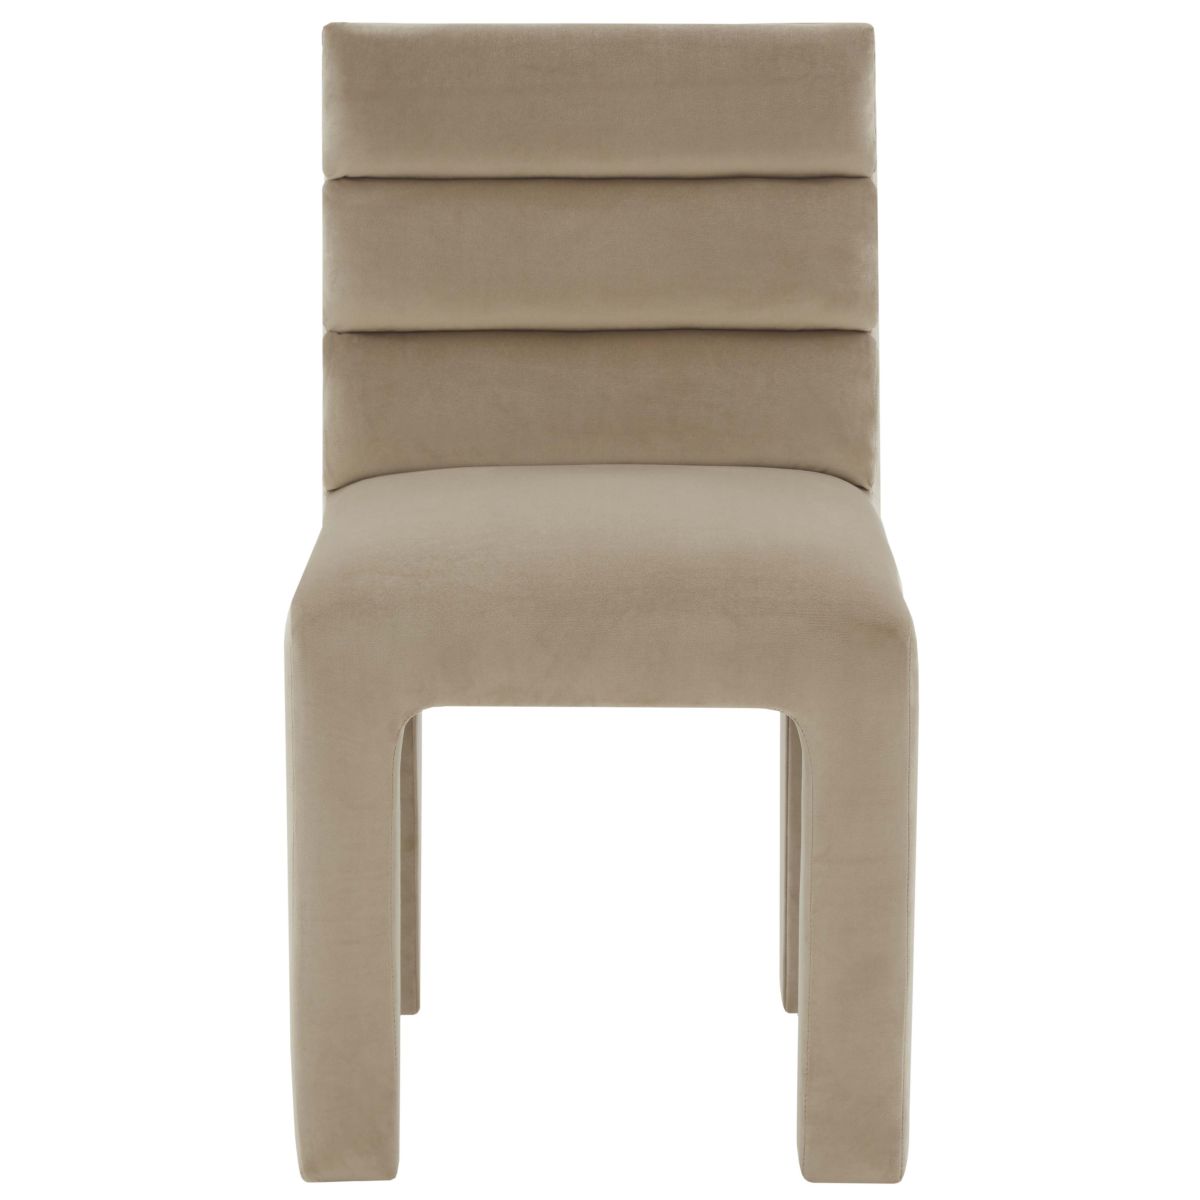 Safavieh Couture Pietro Channel Tufted Dining Chair - Light Brown